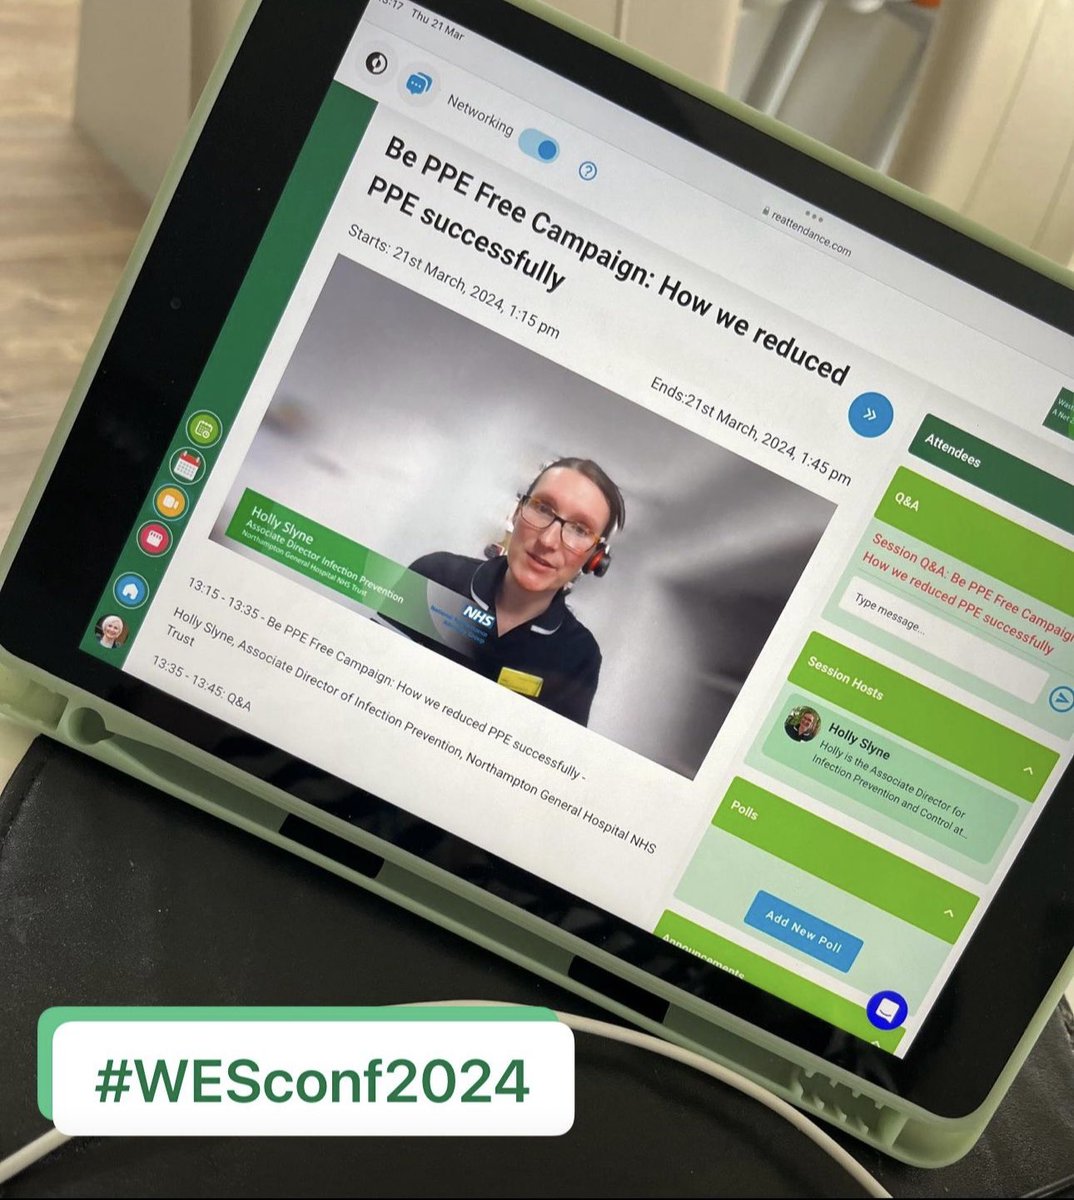 On now!🙌 Holly Slyne with ‘How we reduced PEE successfully’ #WESconf2024